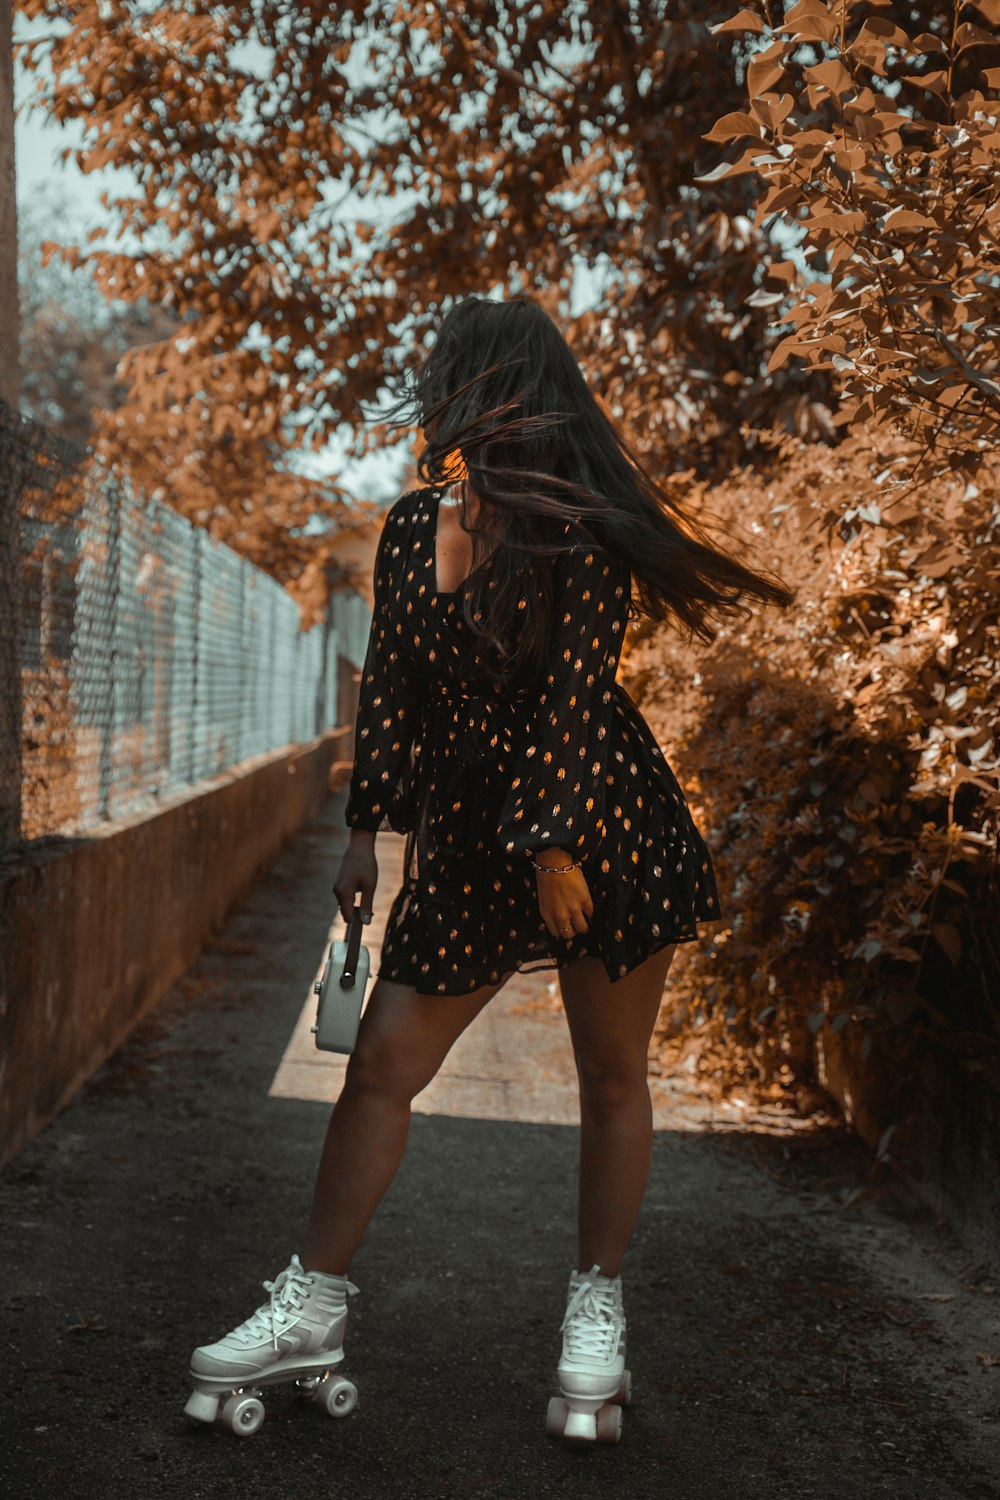 woman in black and white polka dot dress walking on pathway